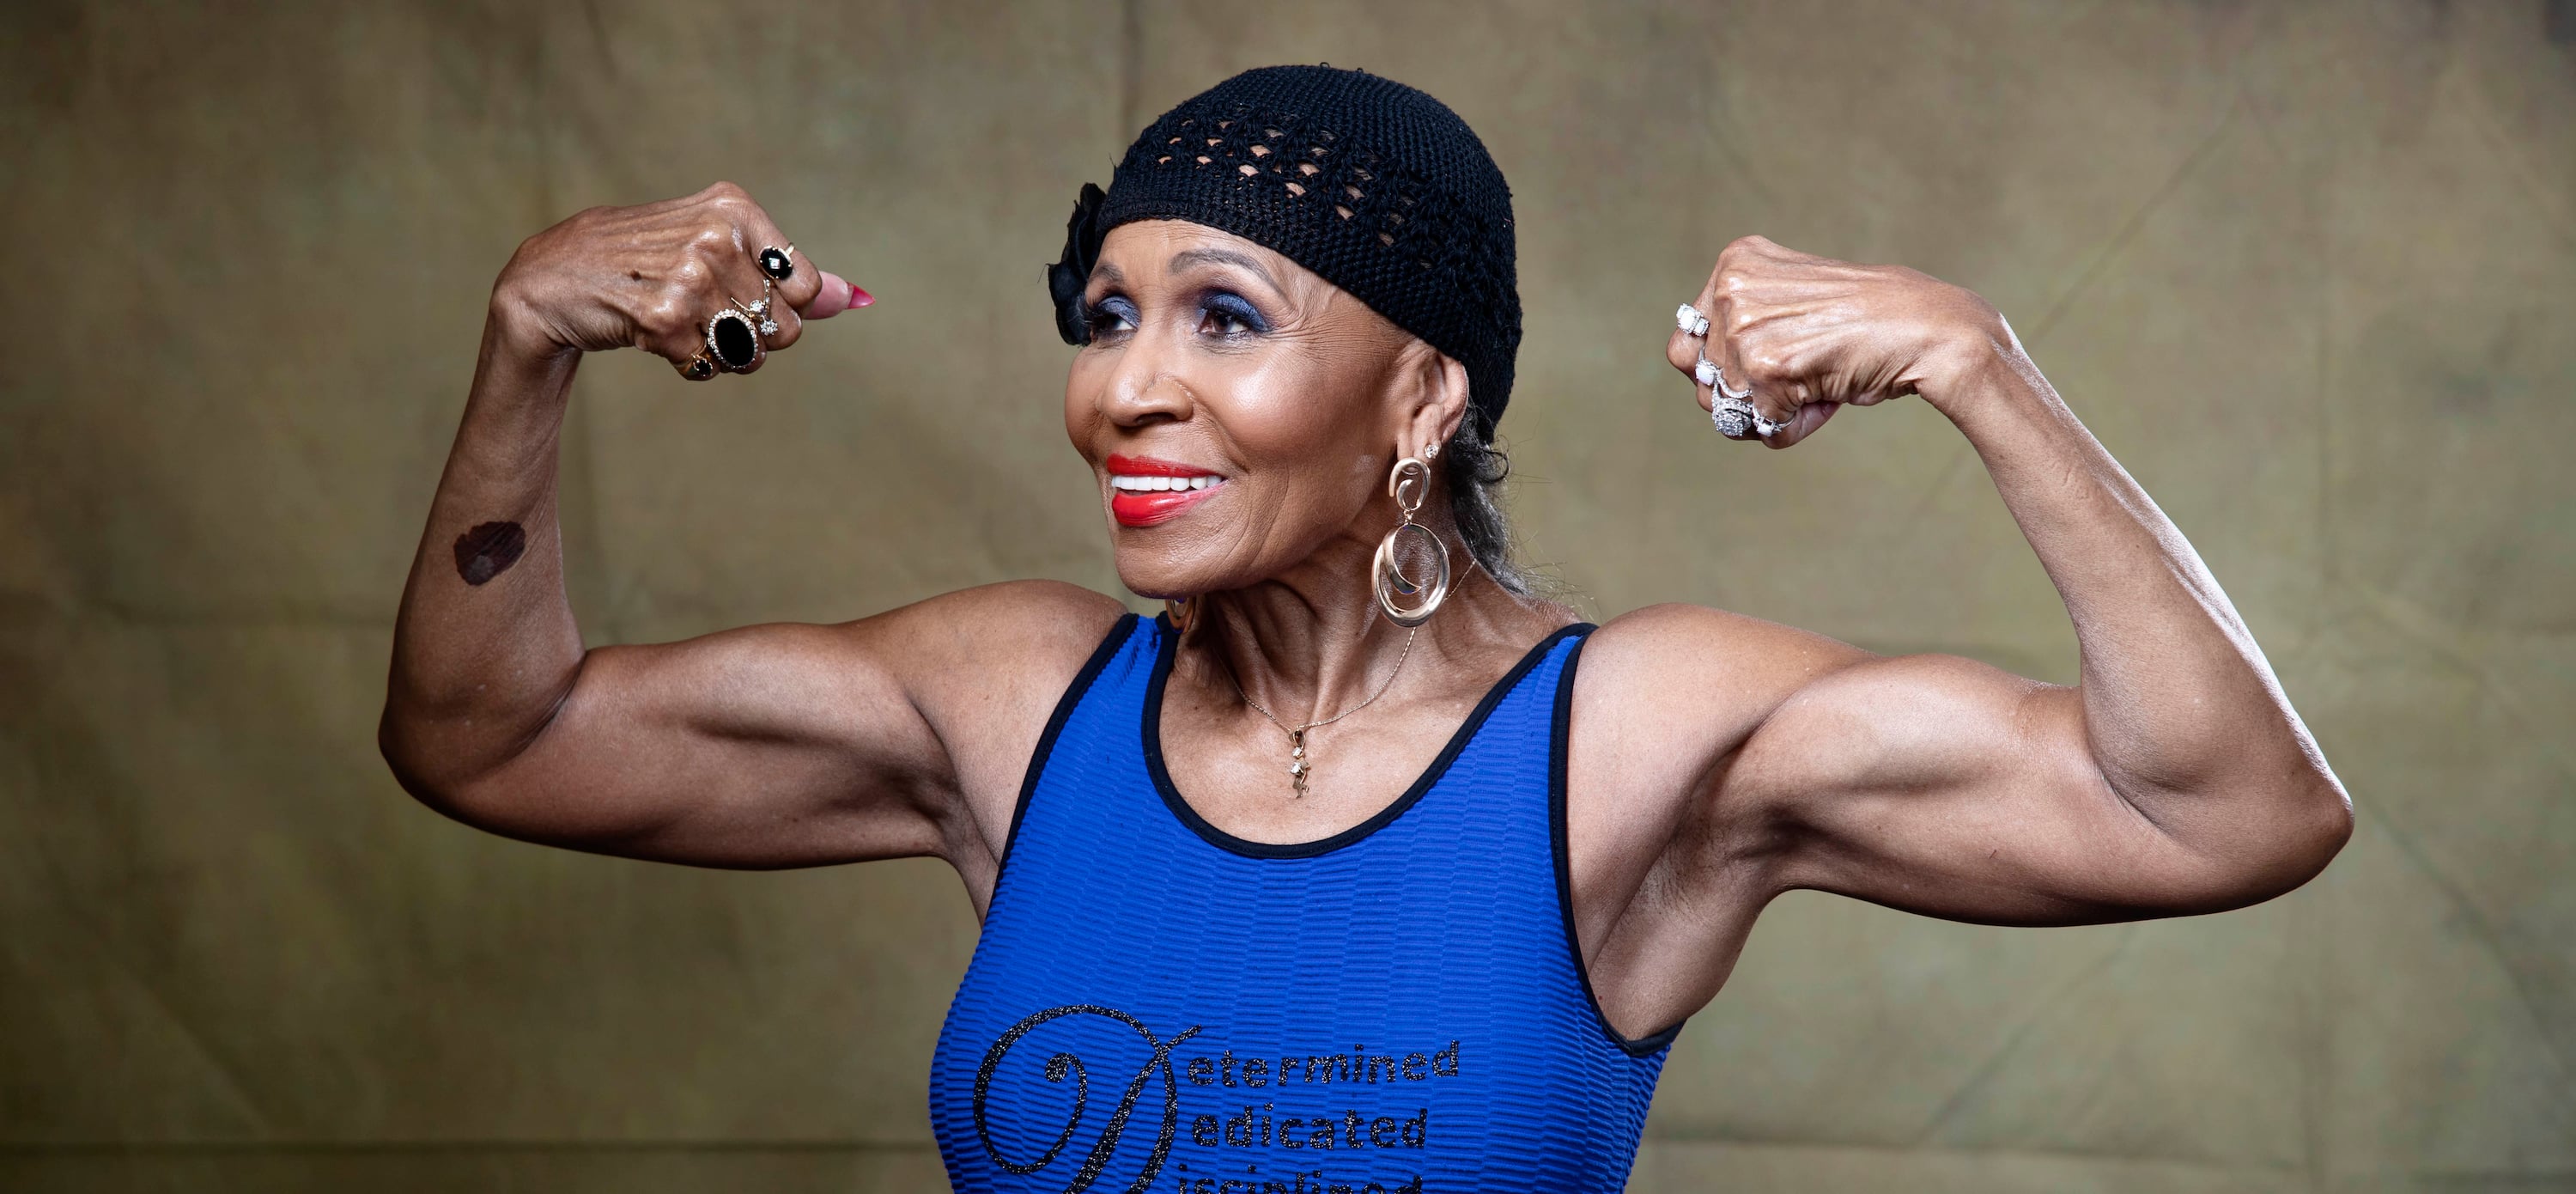 david platon recommends 70 Year Old Lady Bodybuilder